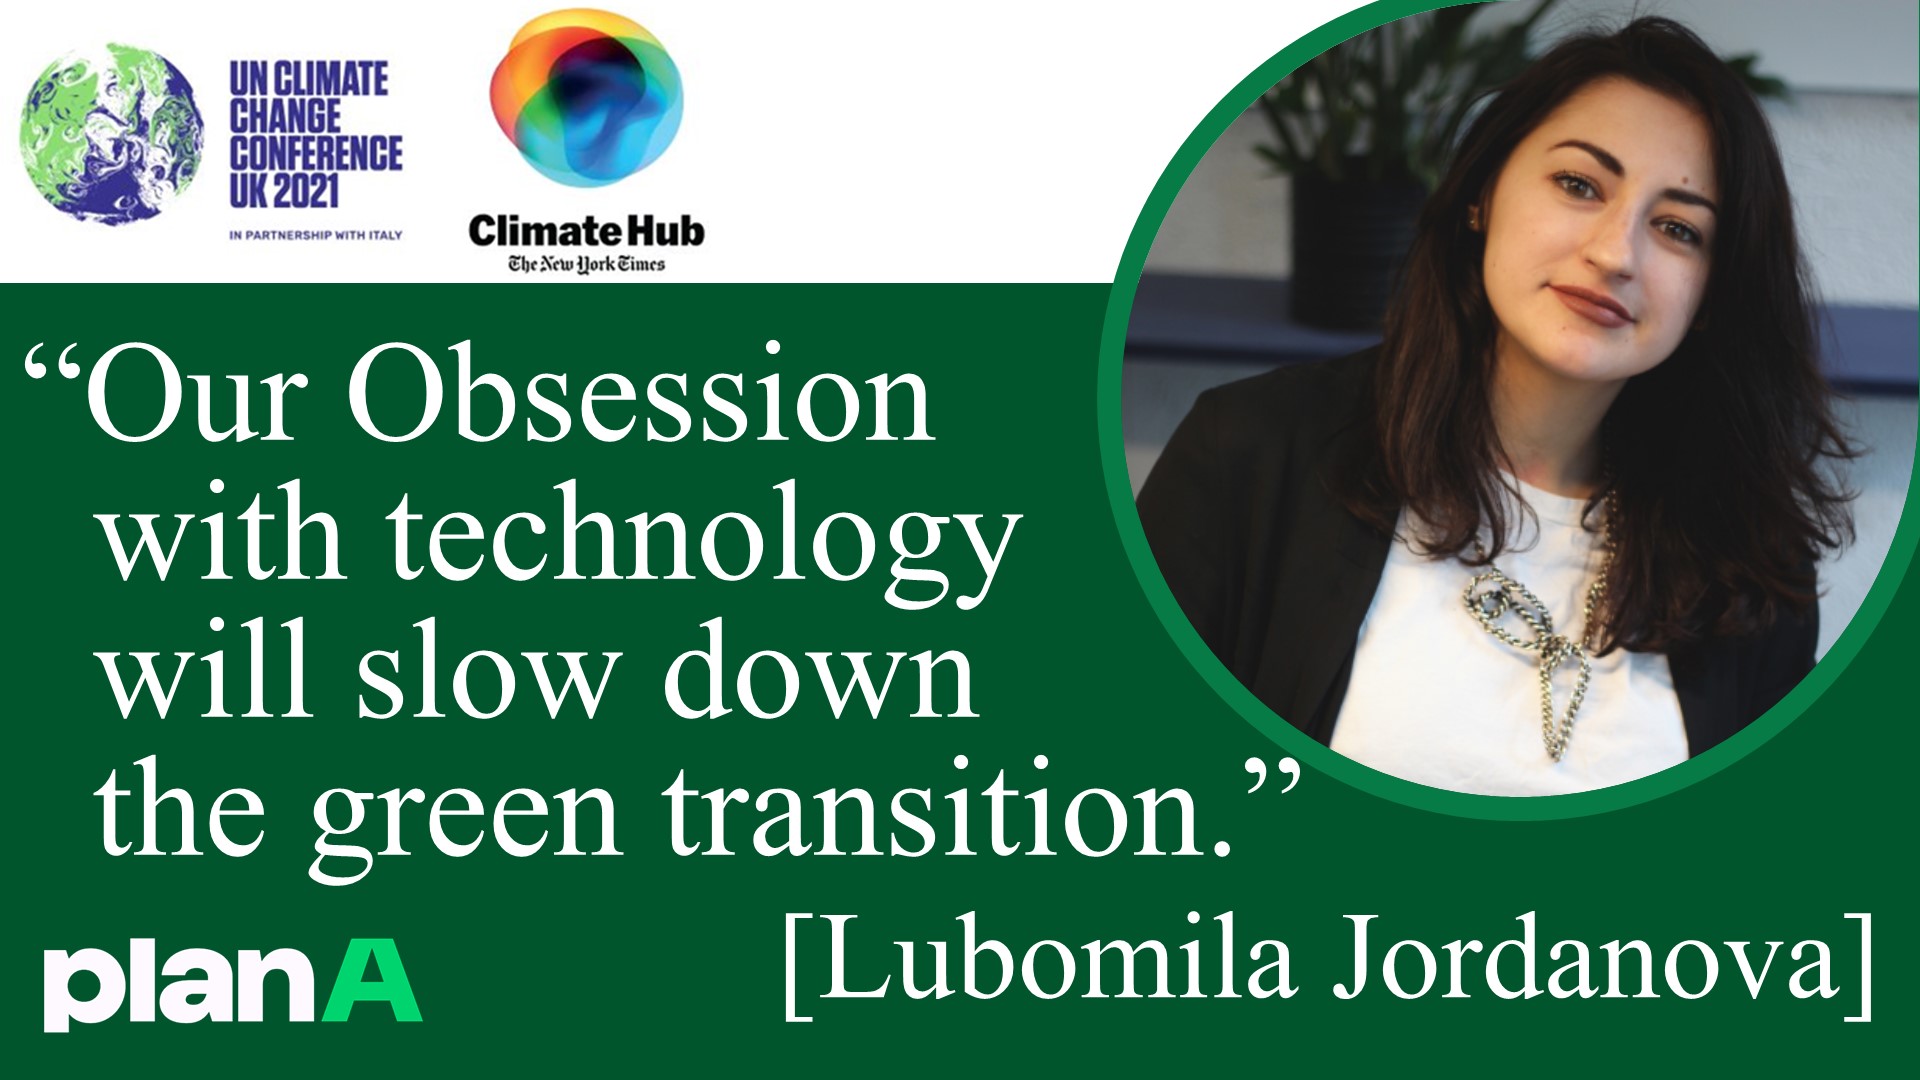 "Our Obsession with technology will slow down the green transition.” [Lubomila Jordanova]